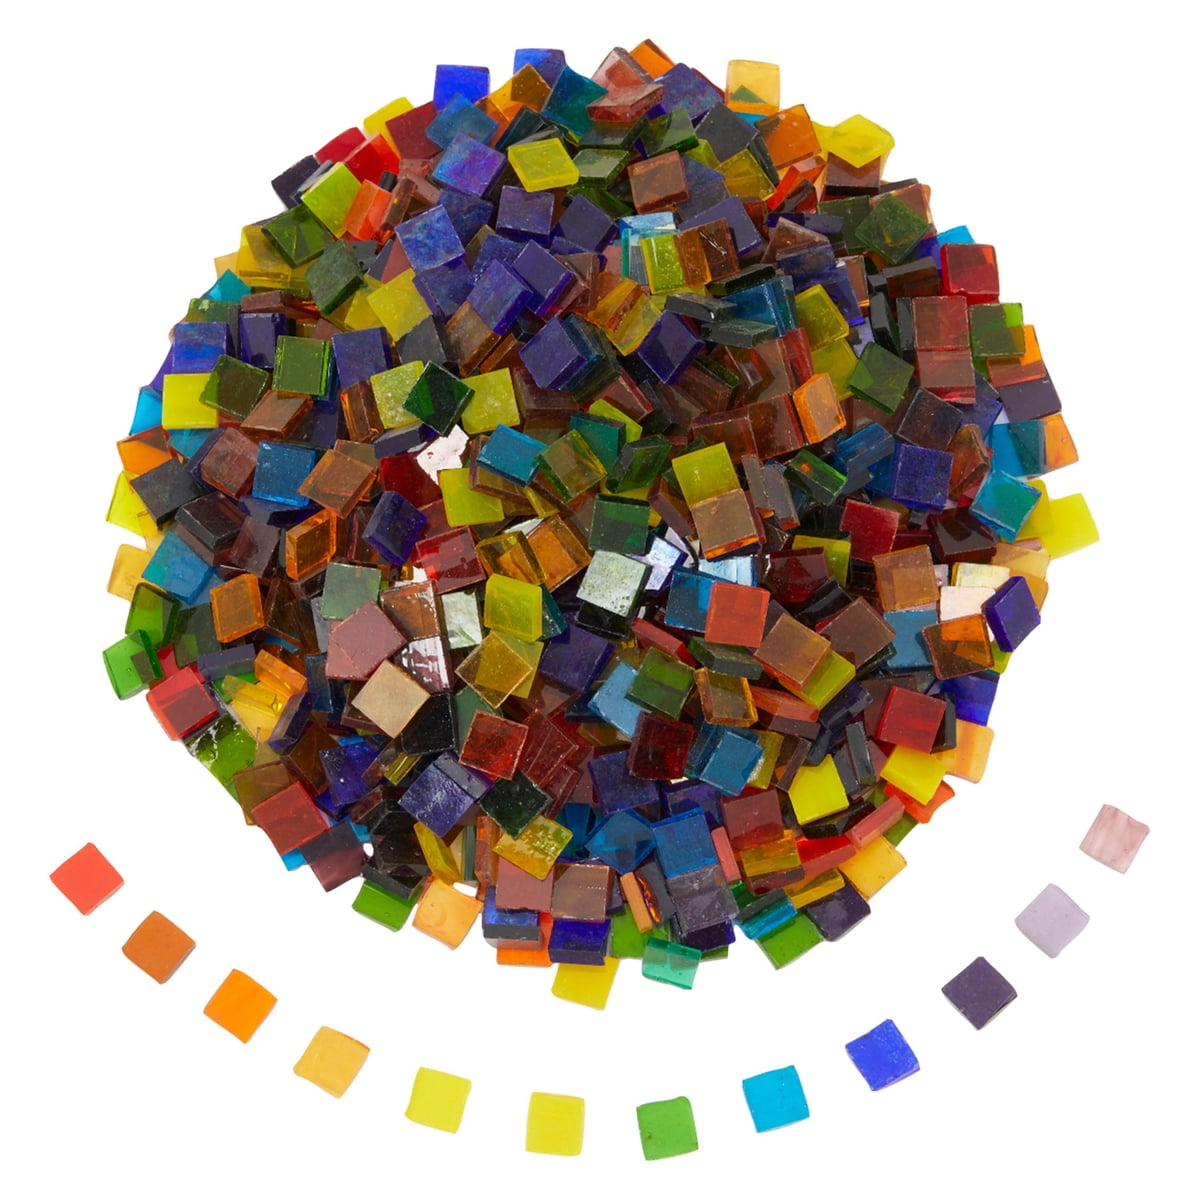 Square,1 by 1 cm Square 1000 Pieces Mixed Color Mosaic Tiles Mosaic Glass Pieces for Home Decoration or DIY Crafts 